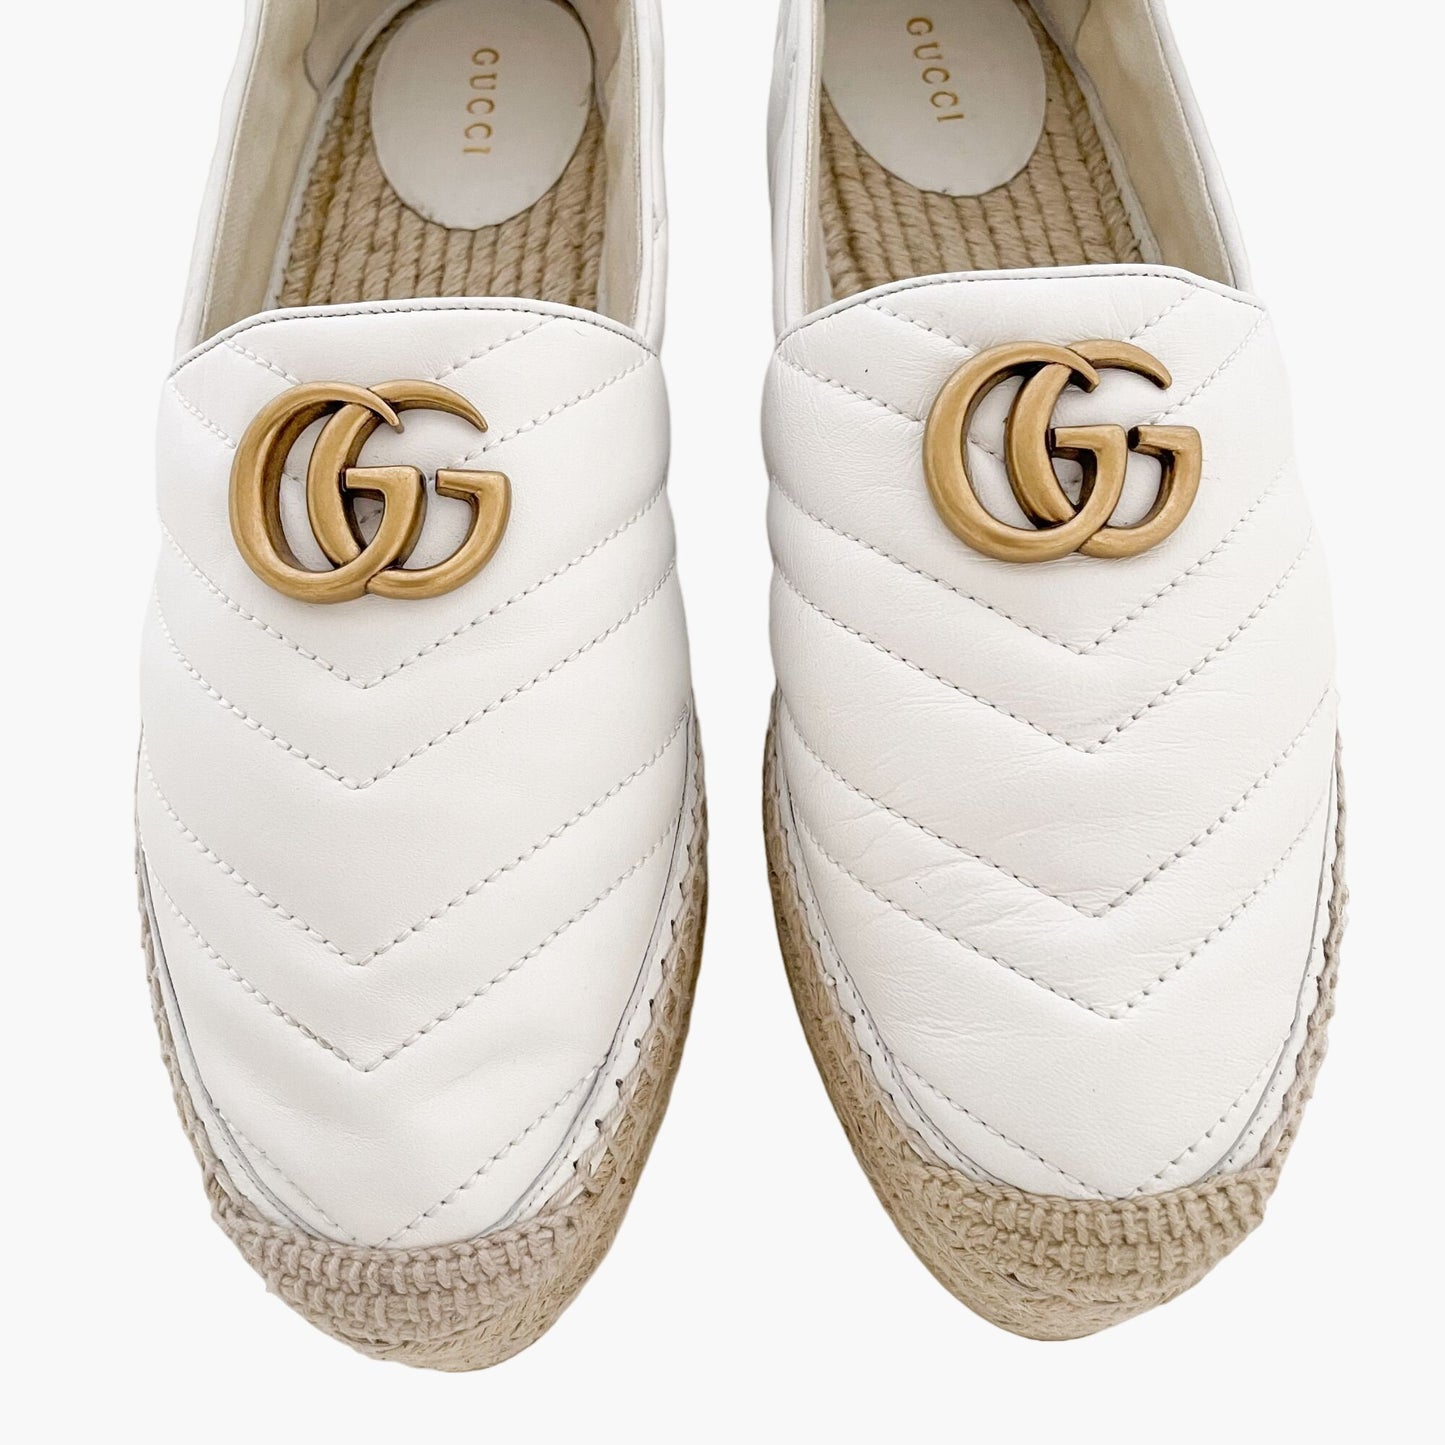 Gucci Charlotte Platform Espadrille in Great White Nappa Leather Size 41